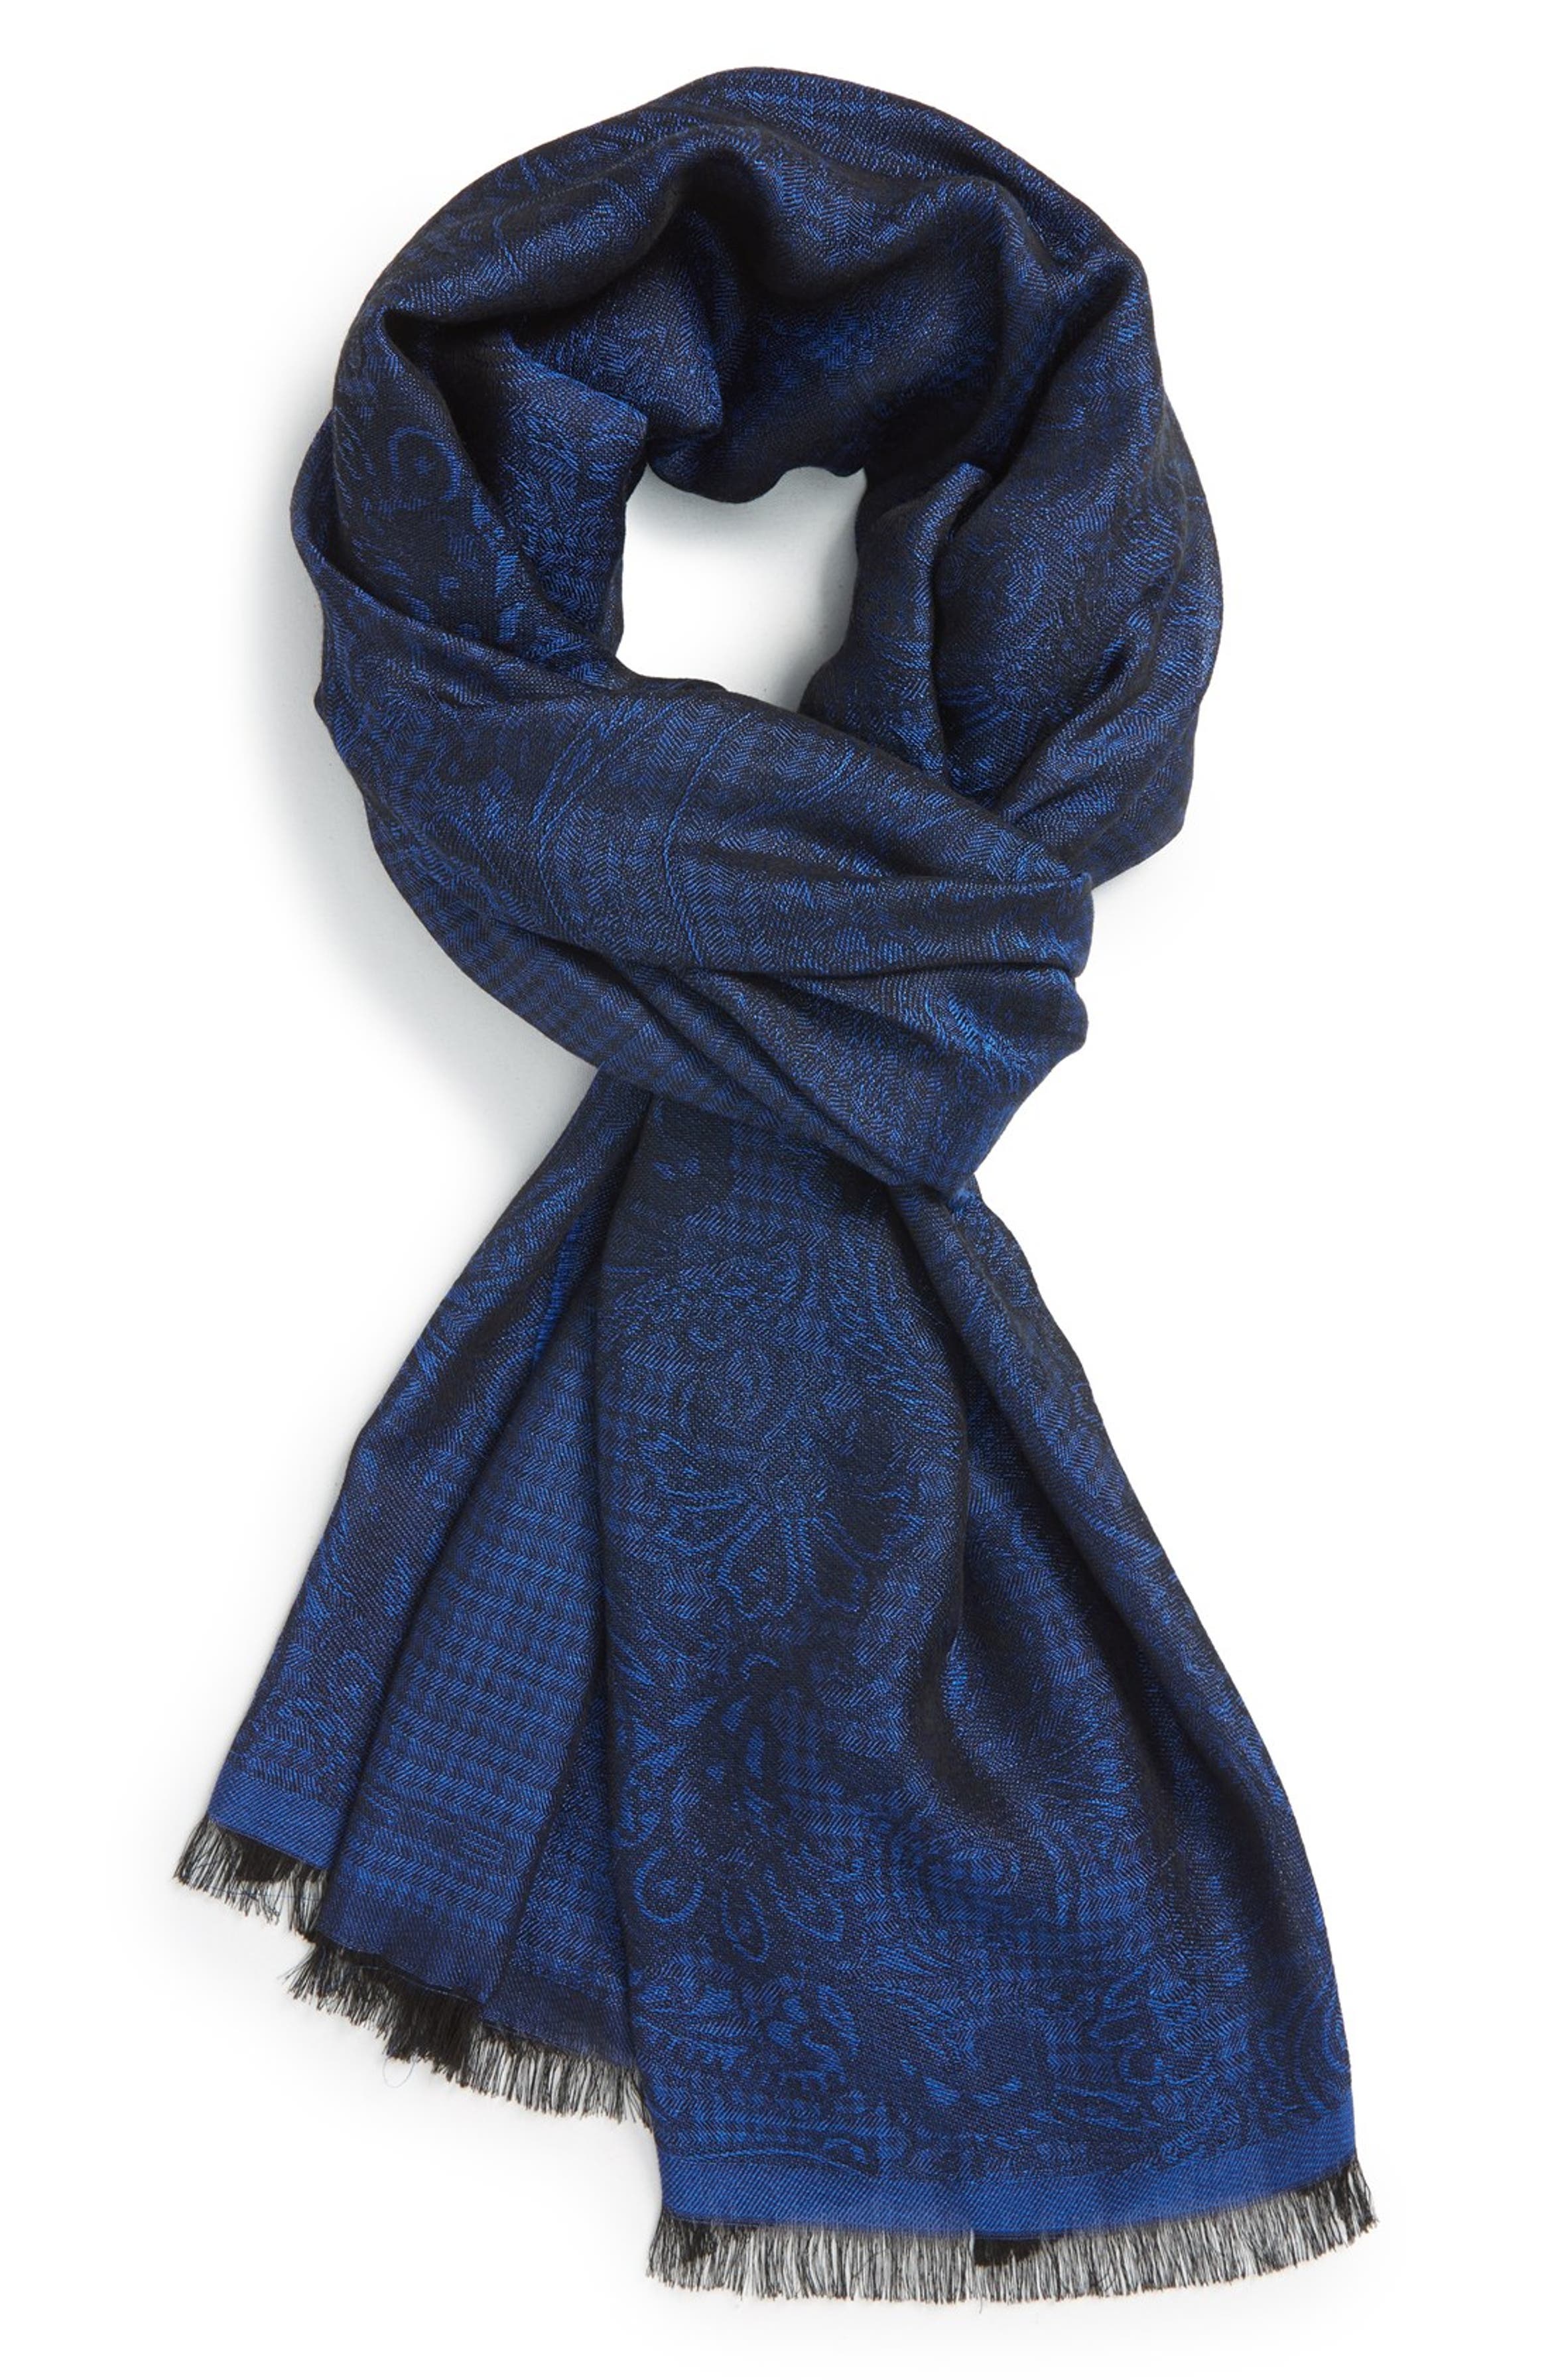 Etro Houndstooth Paisley Scarf | Nordstrom